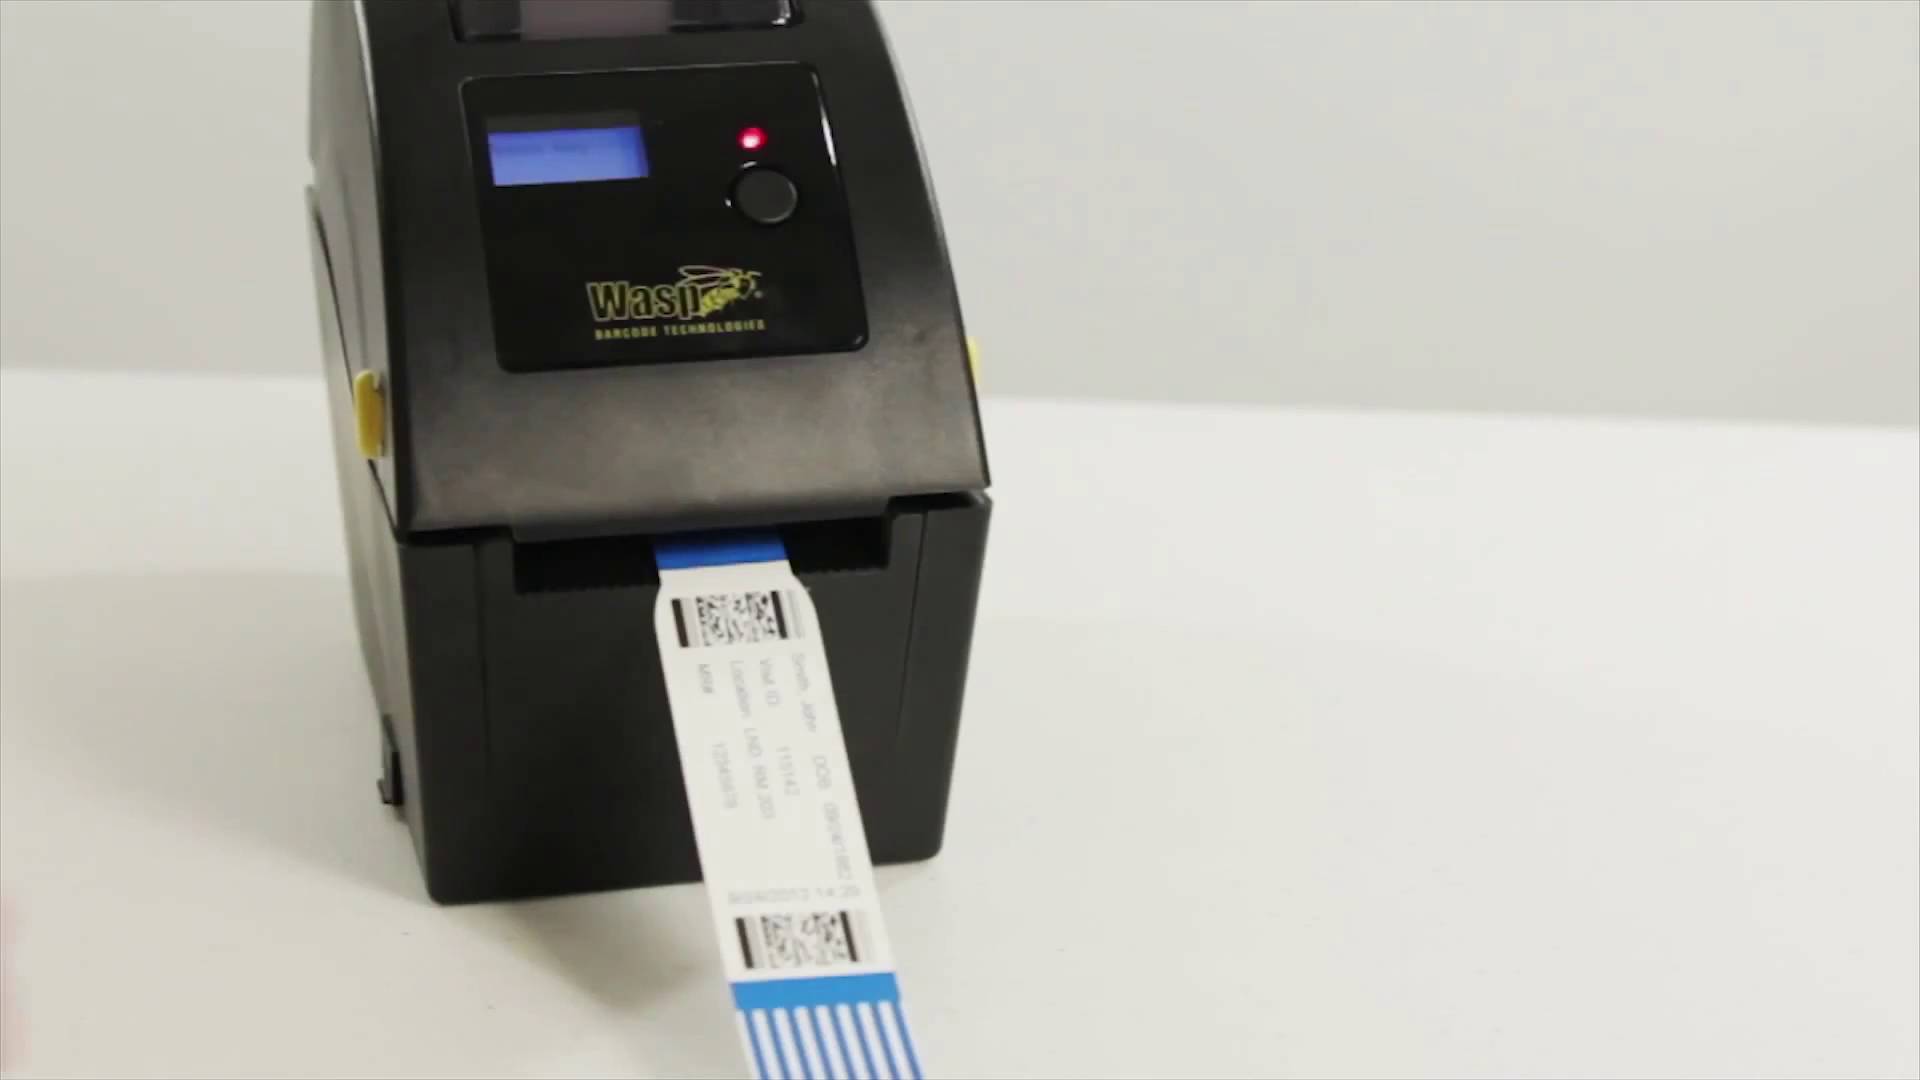 Bar Code Scanners Wasp Barcode Technologies 850roll 4 Roll Product Category Supplieslabels 9745